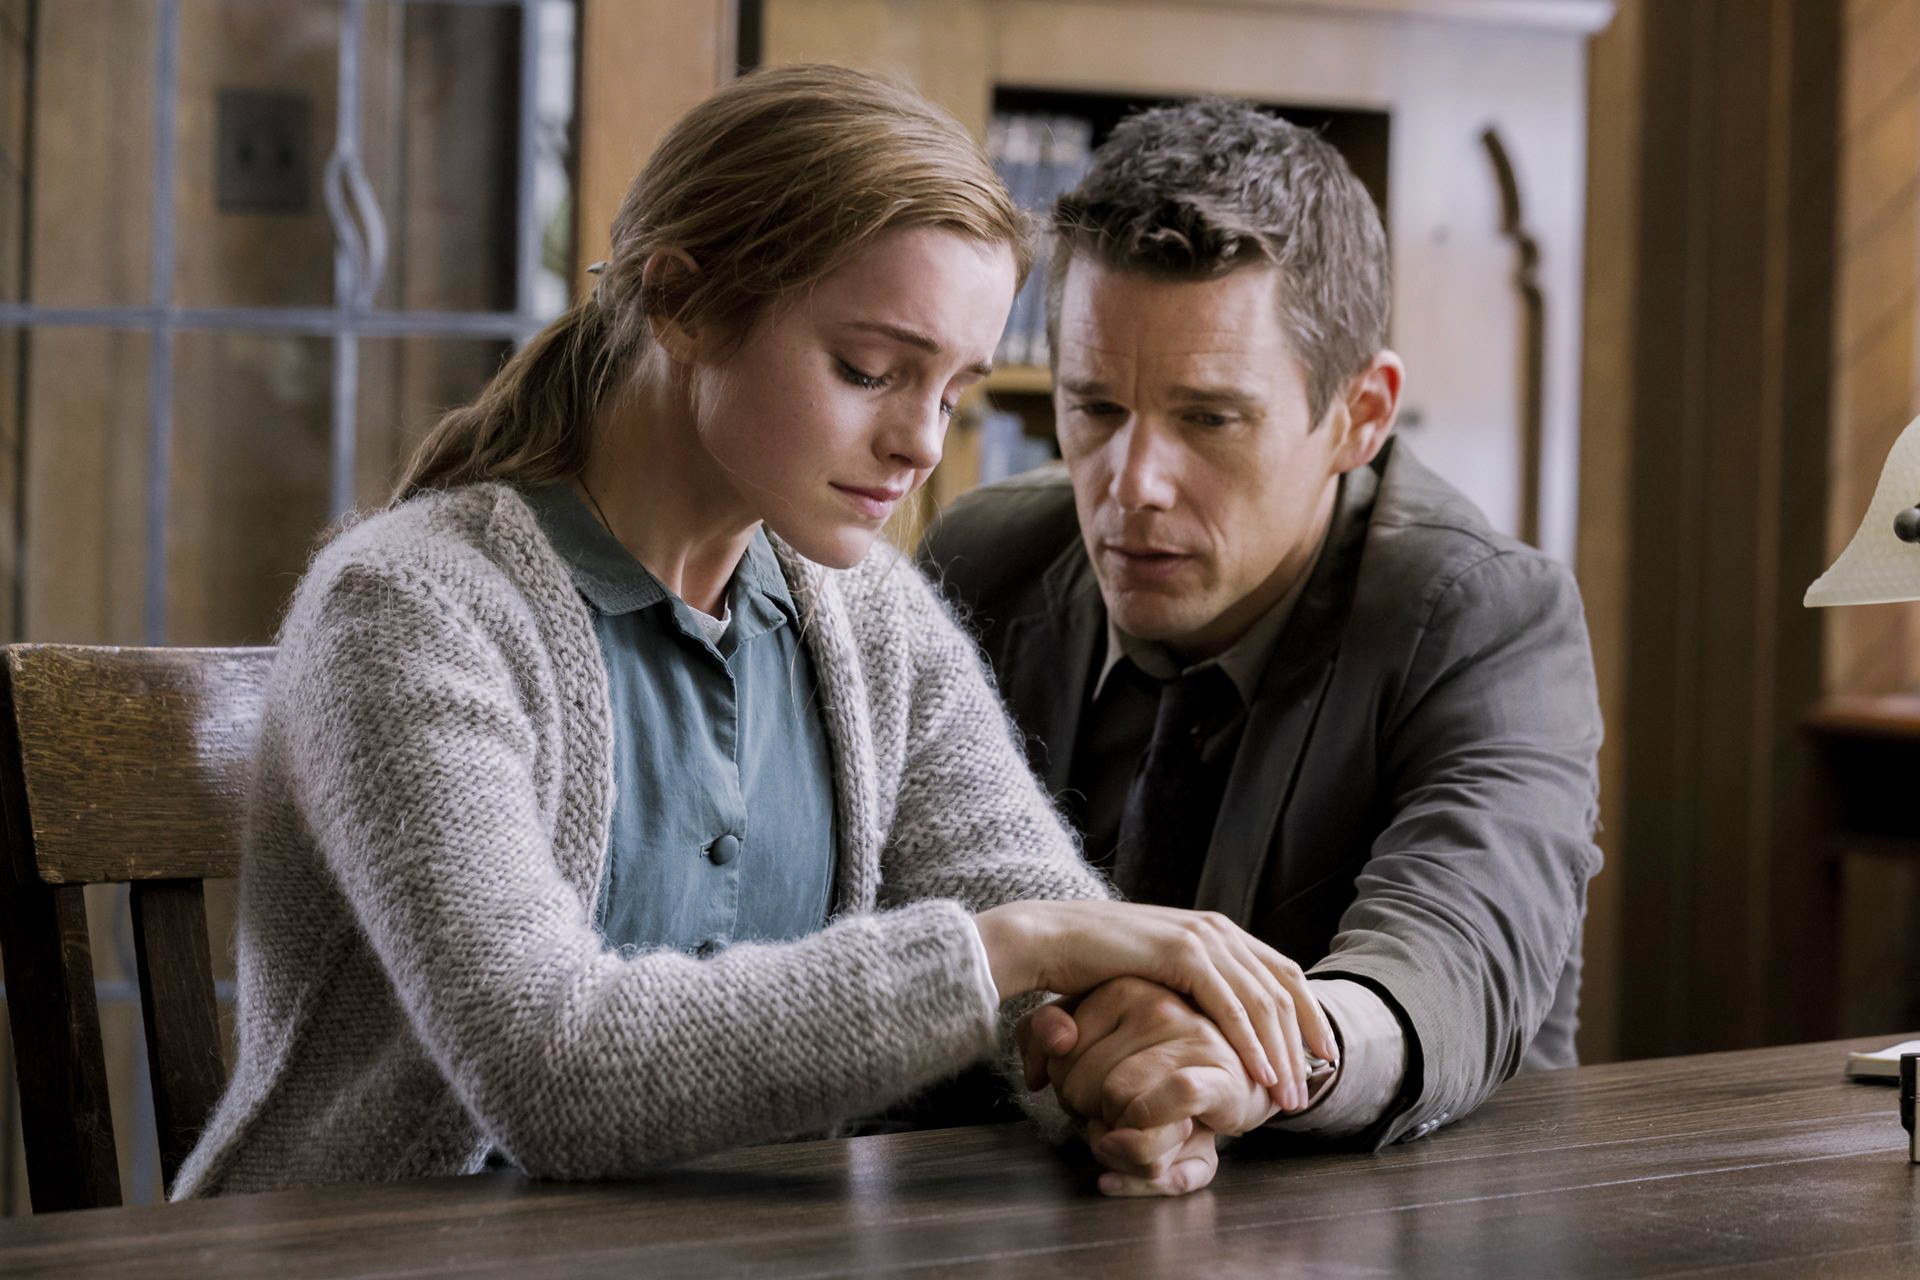 Emma Watson and Ethan Hawke have a difficult and emotional conversation in &quot;Regression&quot;